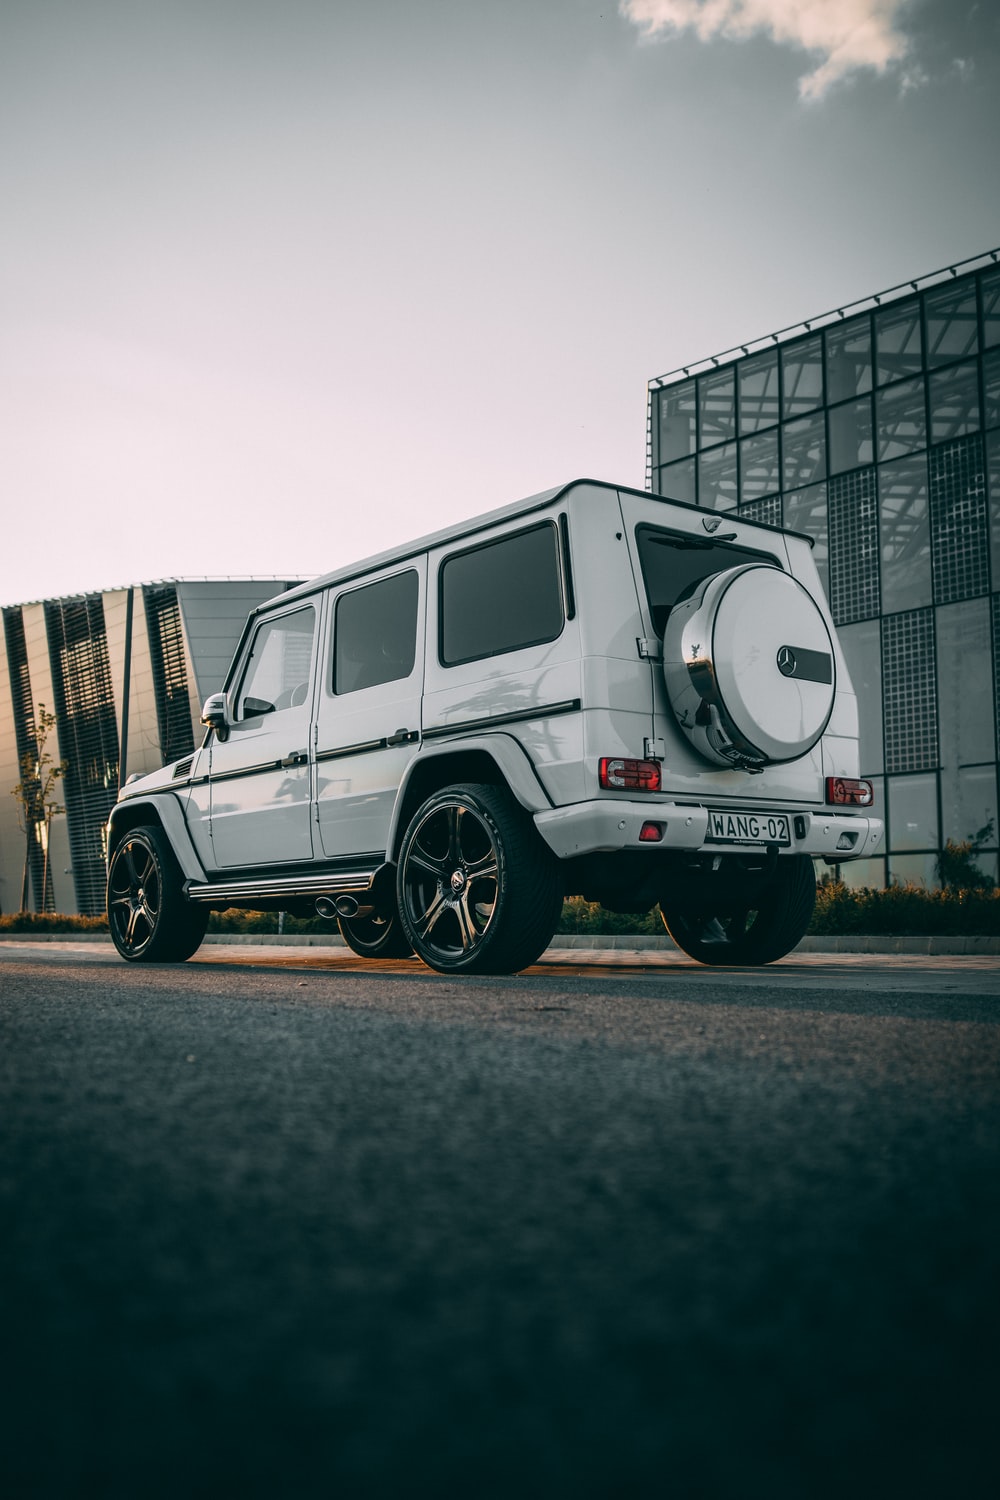 Mercedes G Class Picture. Download Free Image